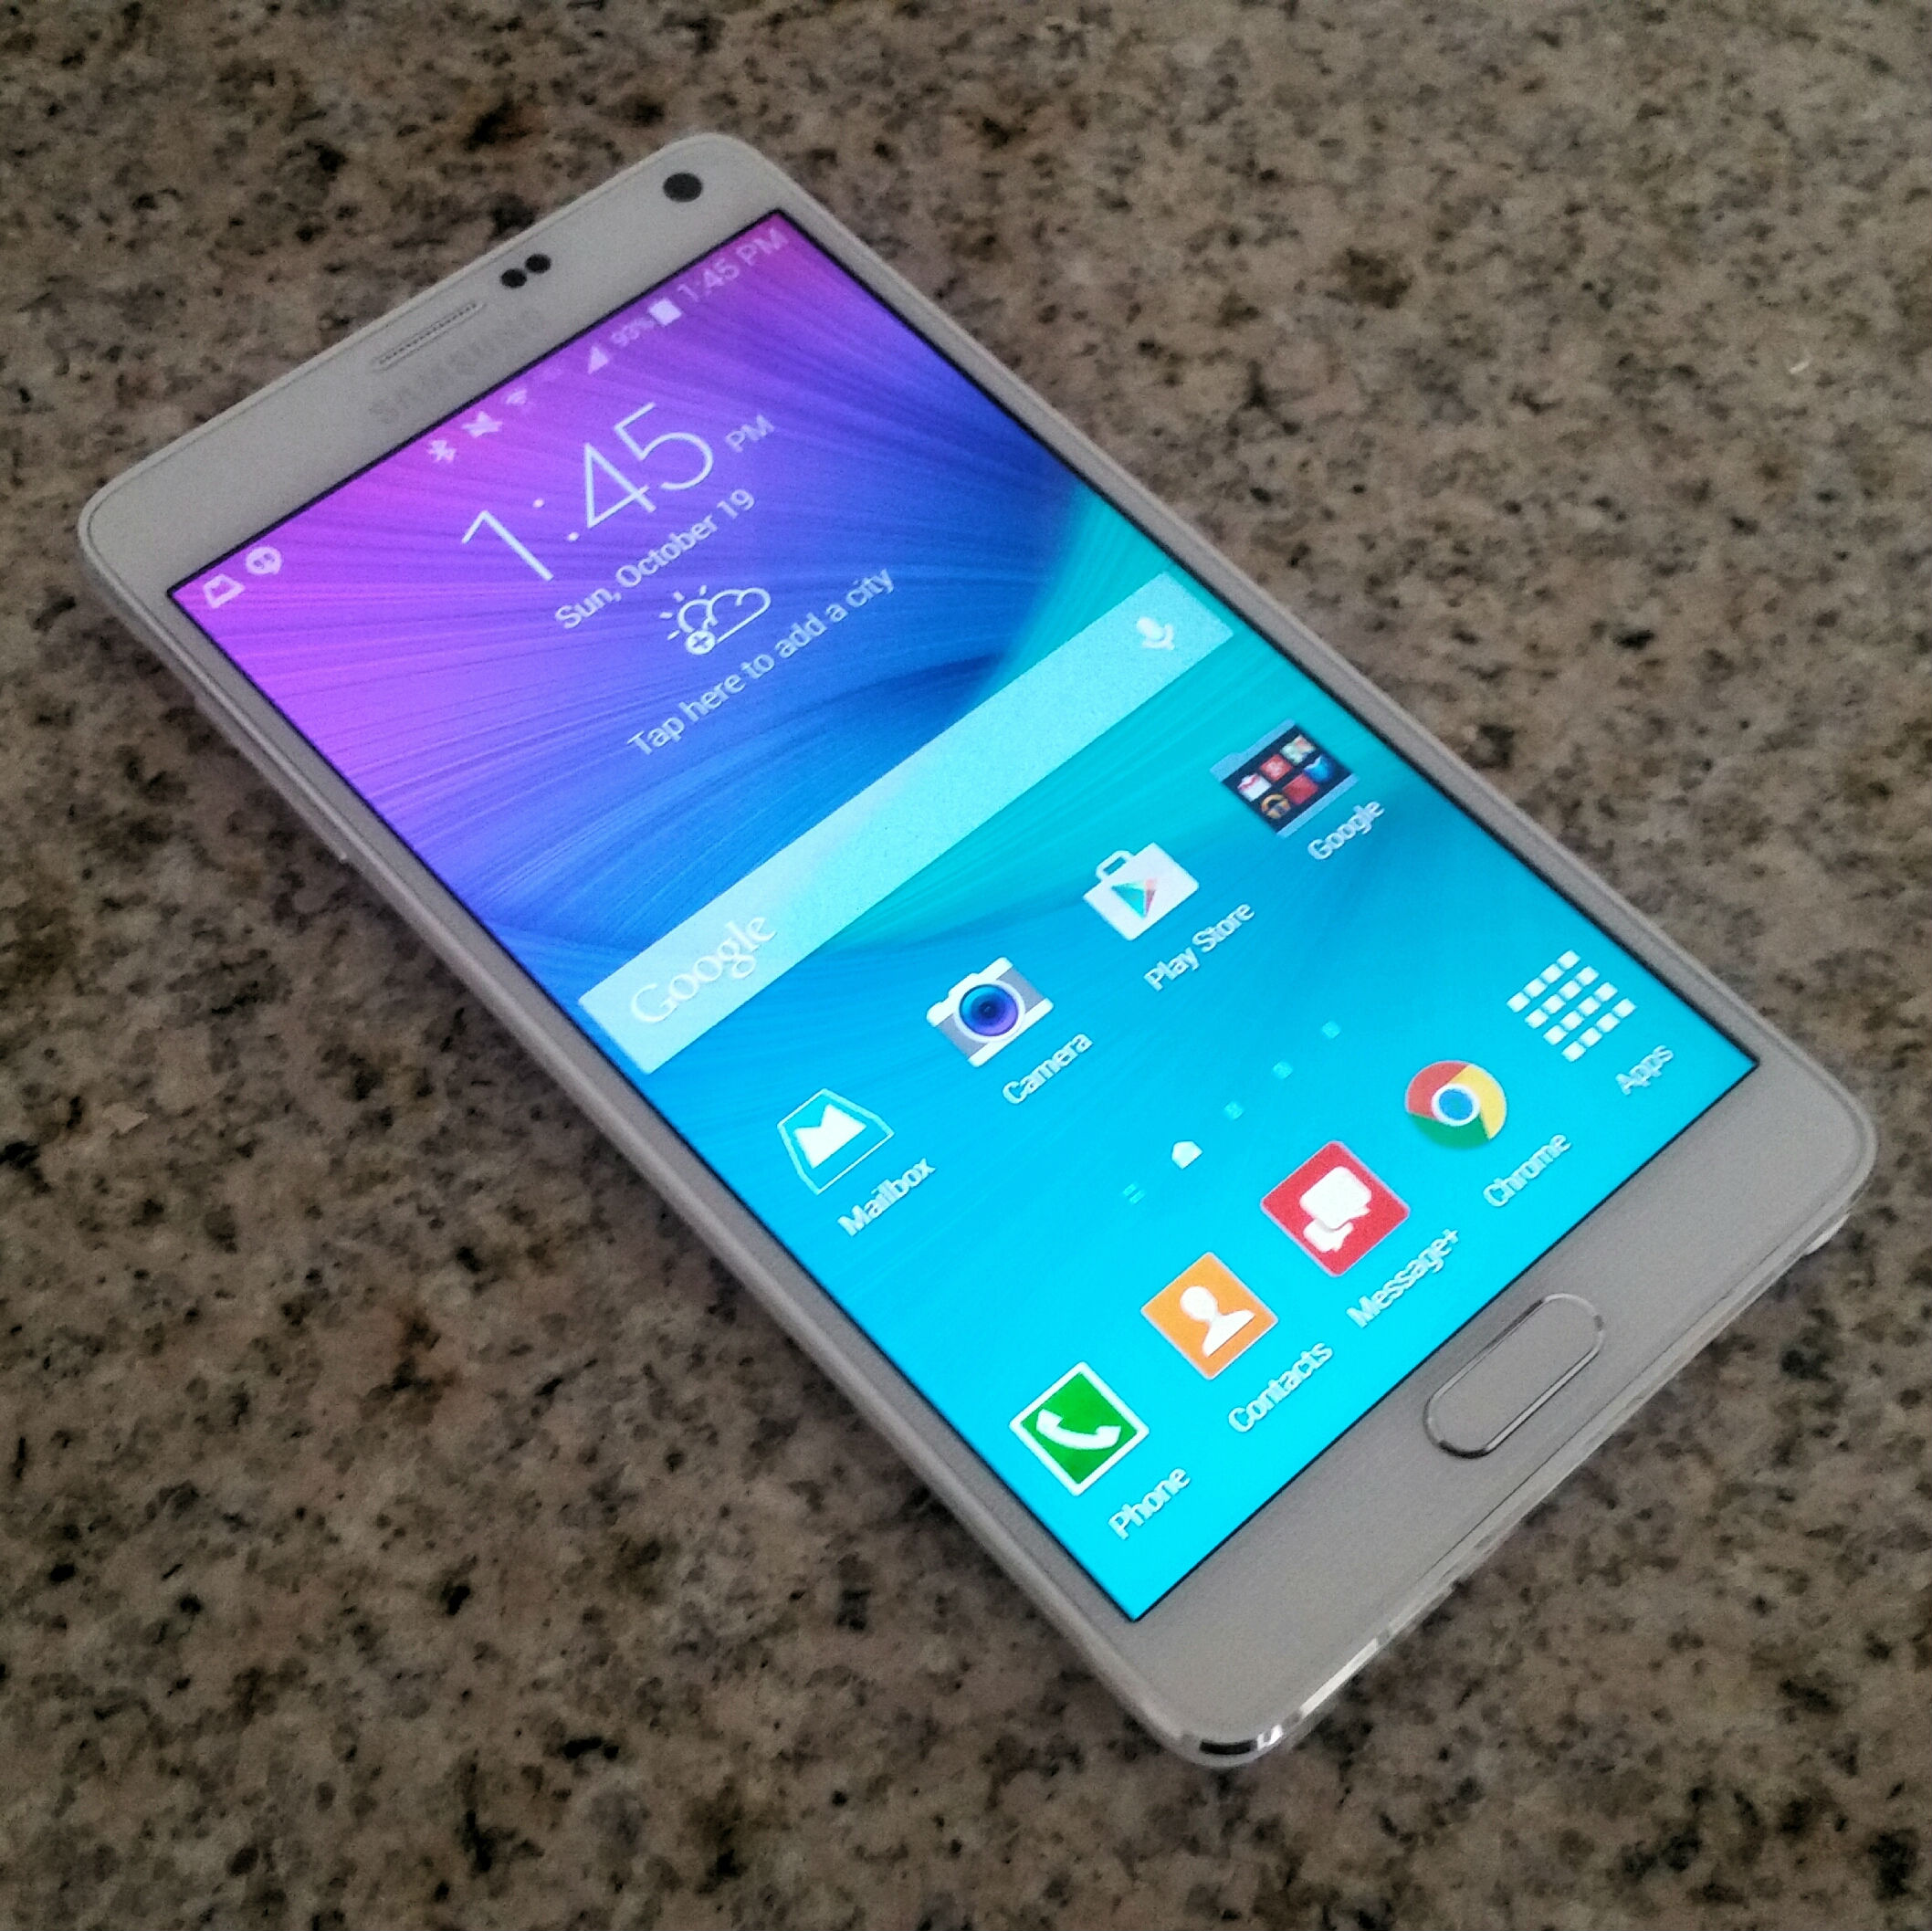 Samsung Galaxy Note 4 (Verizon) Unboxing and first impressions